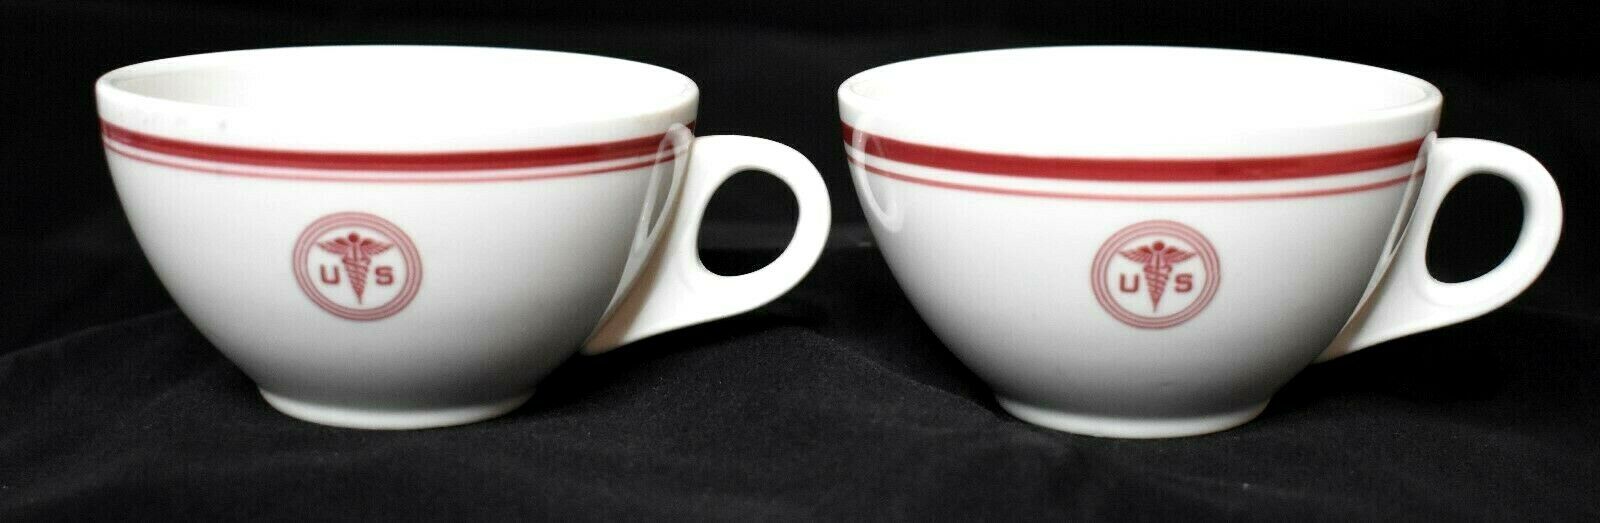 WWII US Army Medical Dept Coffee cup Set of 2 Shenango China 2 1/8 inches tall